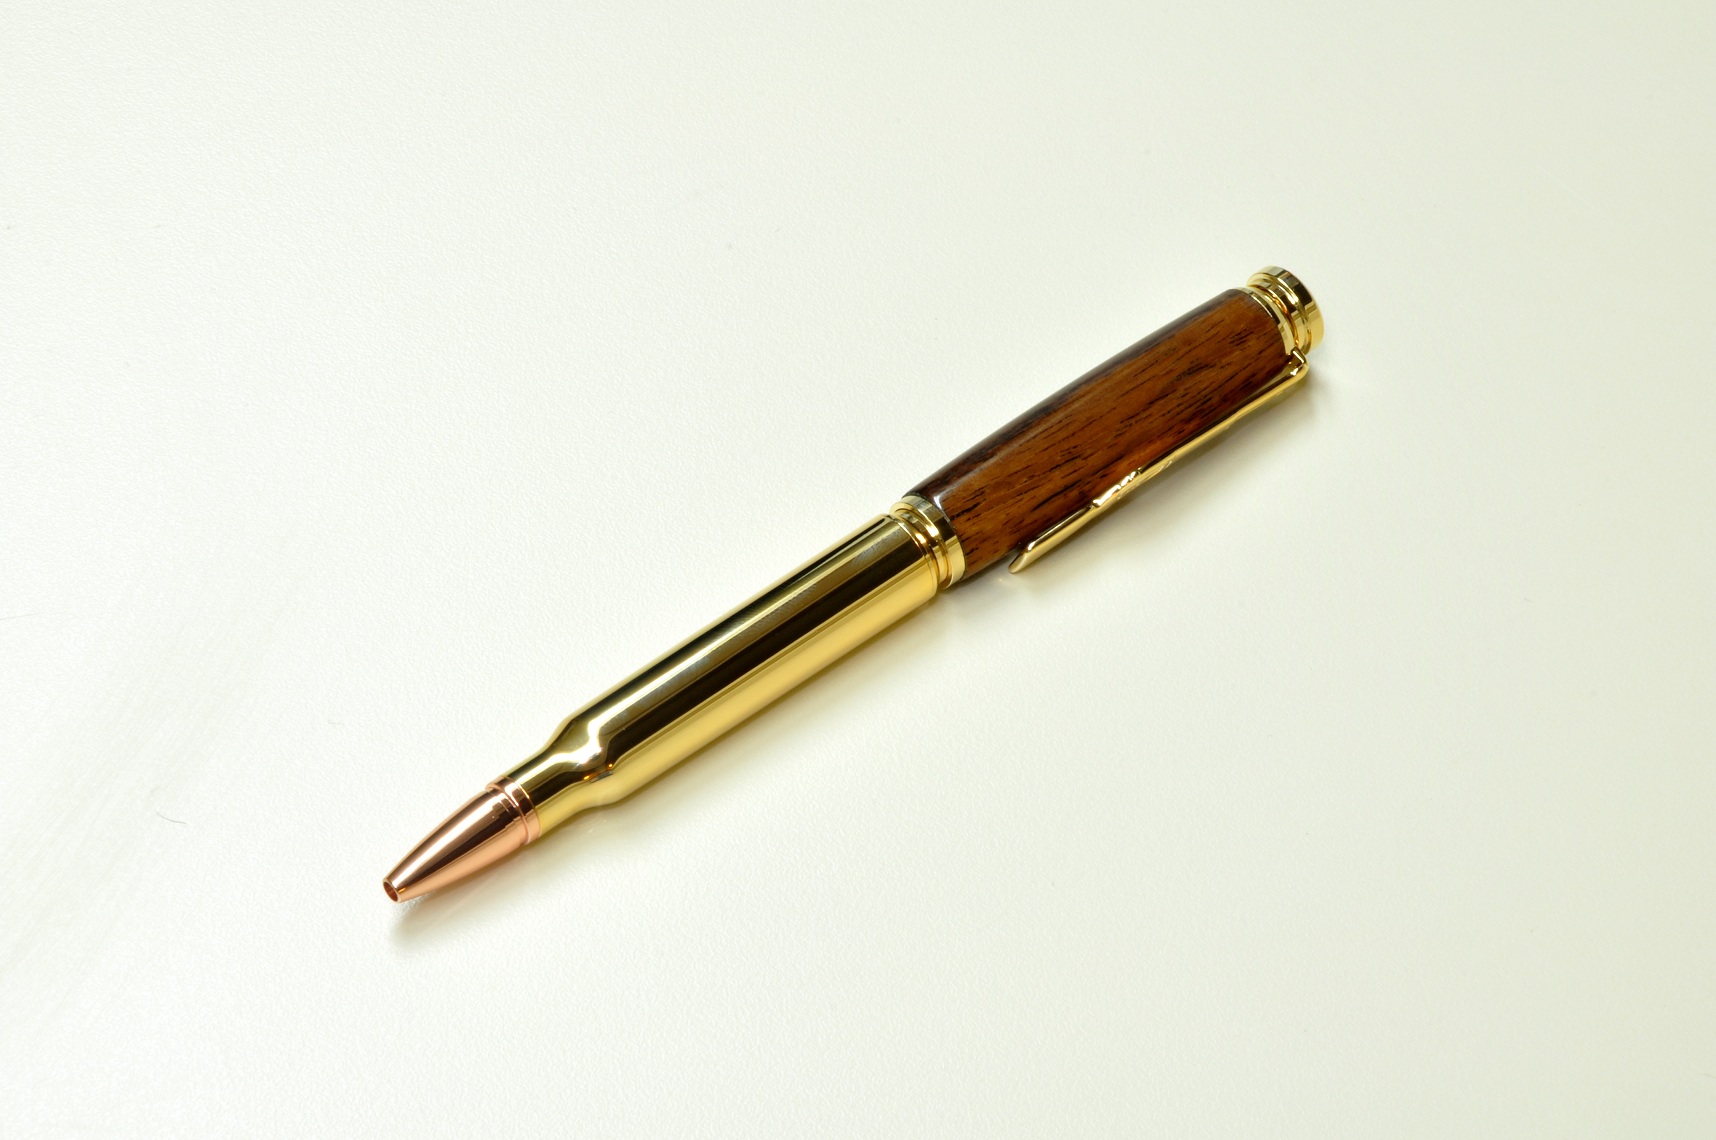 Bullet Twist Pen made from Ifit (Guam Tree)